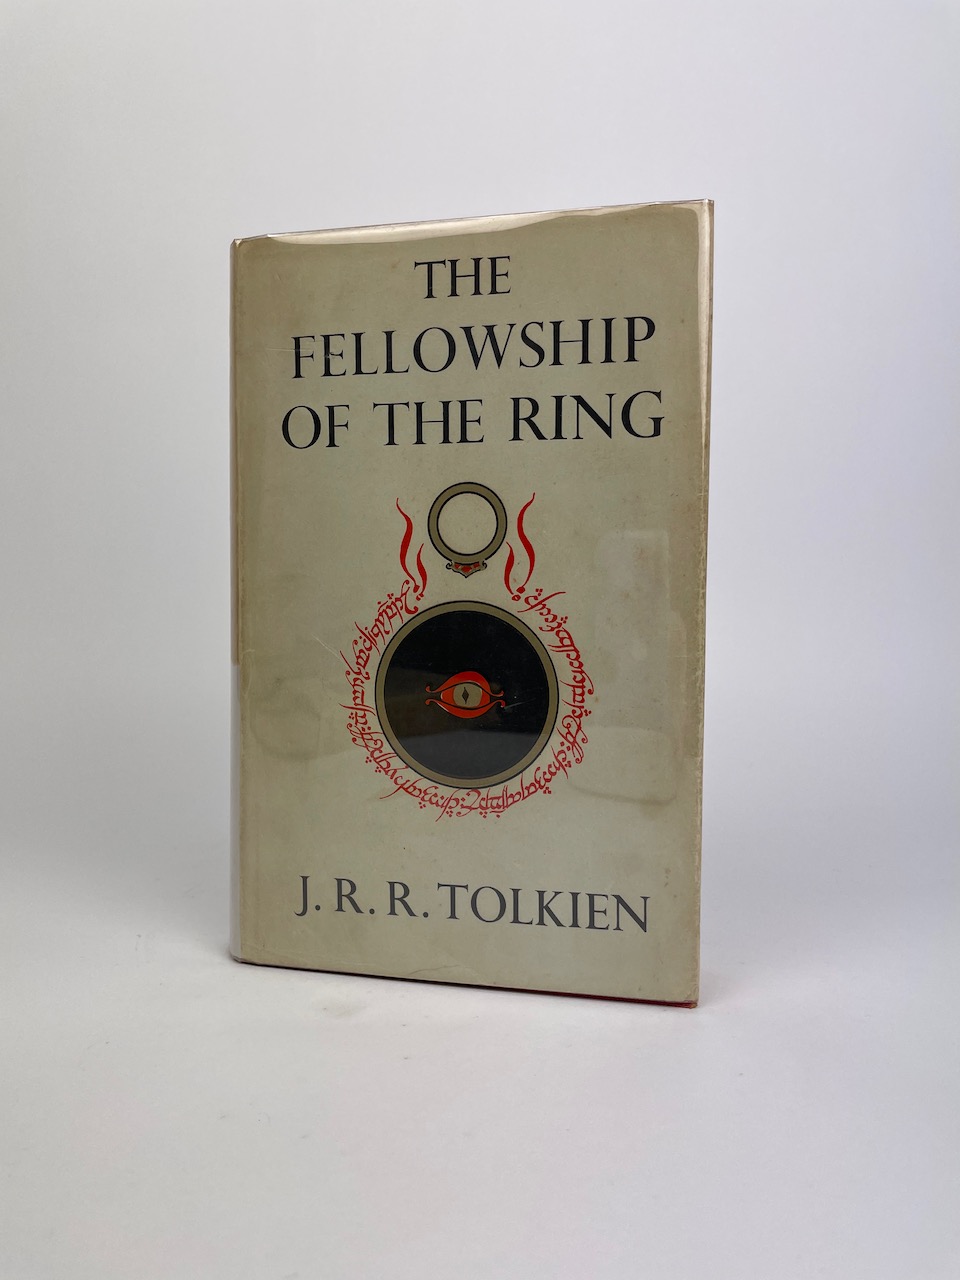 The Fellowship of the Ring: Being the First Part of the Lord of the Rings [First Edition Third Impression]